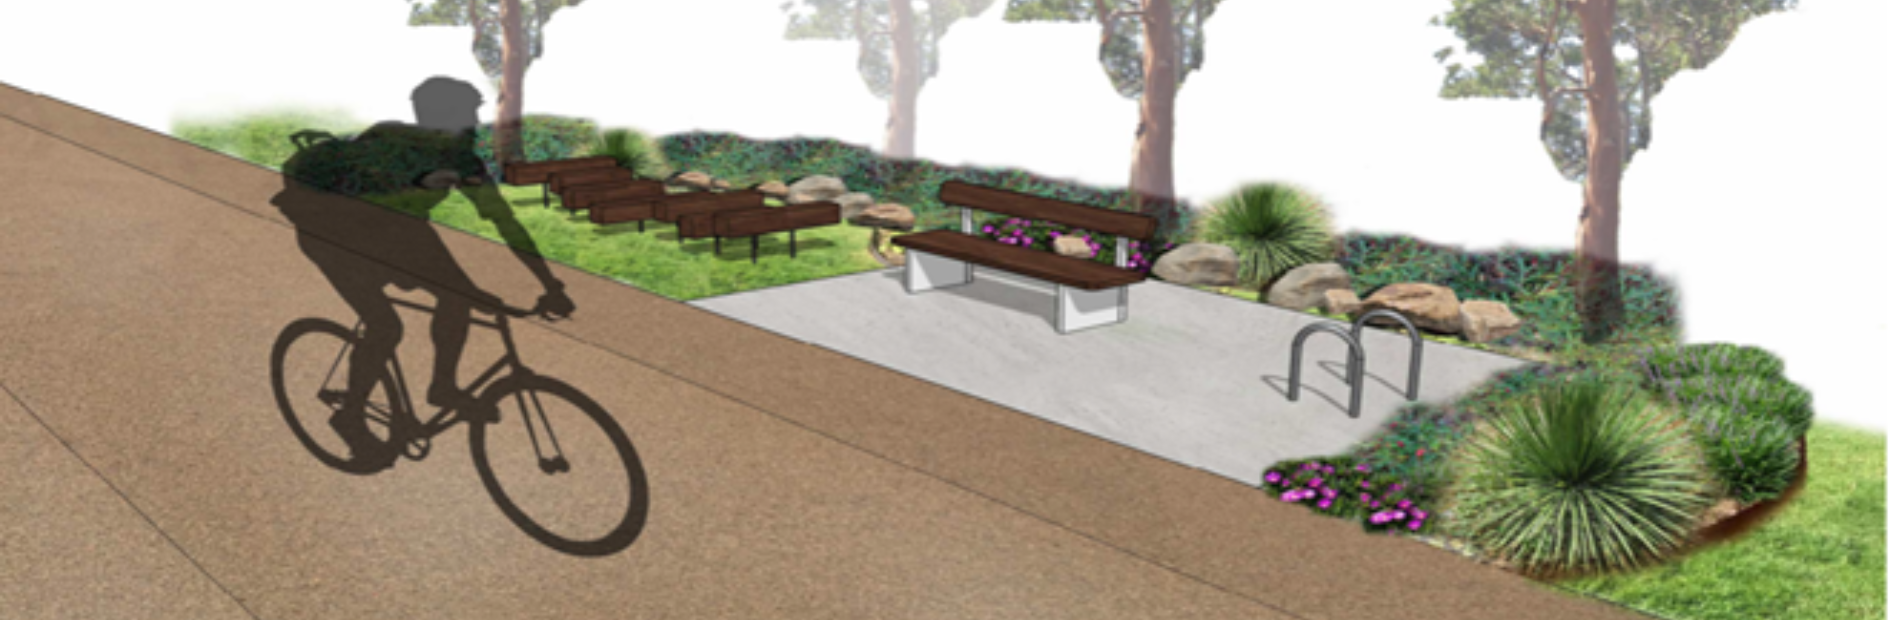 Concept art showing a silhouette of a person on a bike riding on a path. Behind them is a bench and flora area